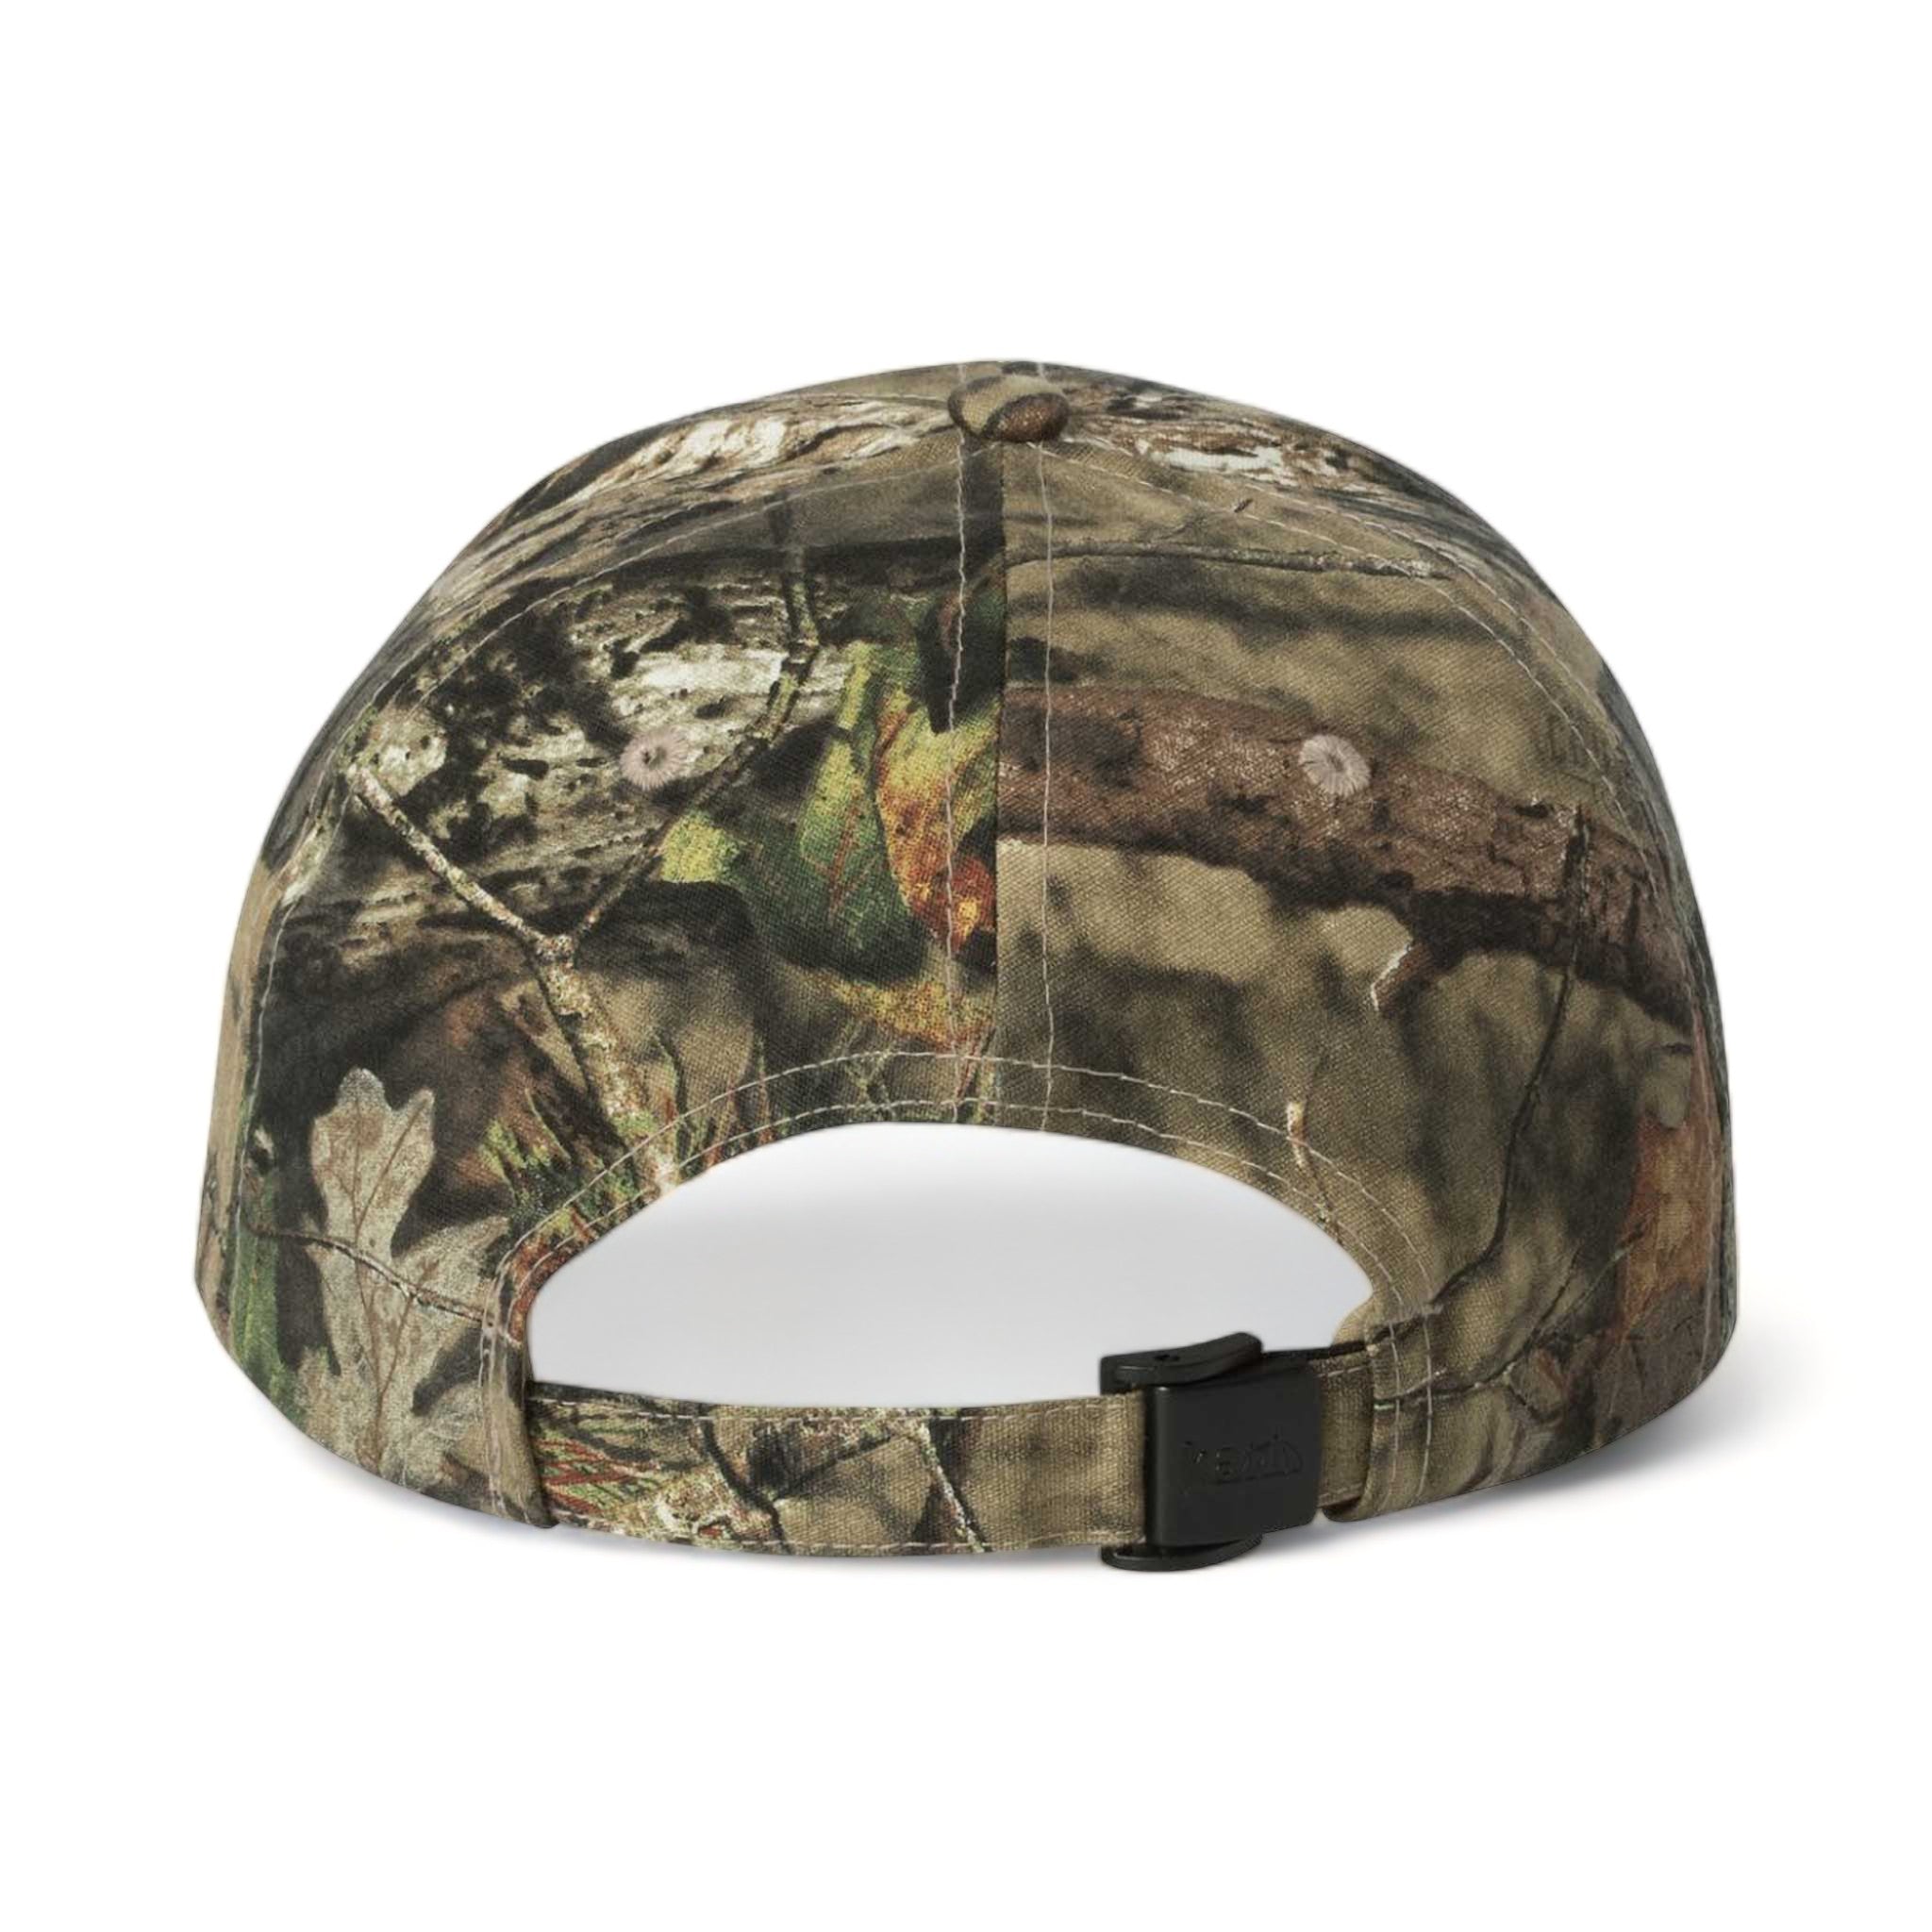 Back view of Kati LC10 custom hat in mossy oak country